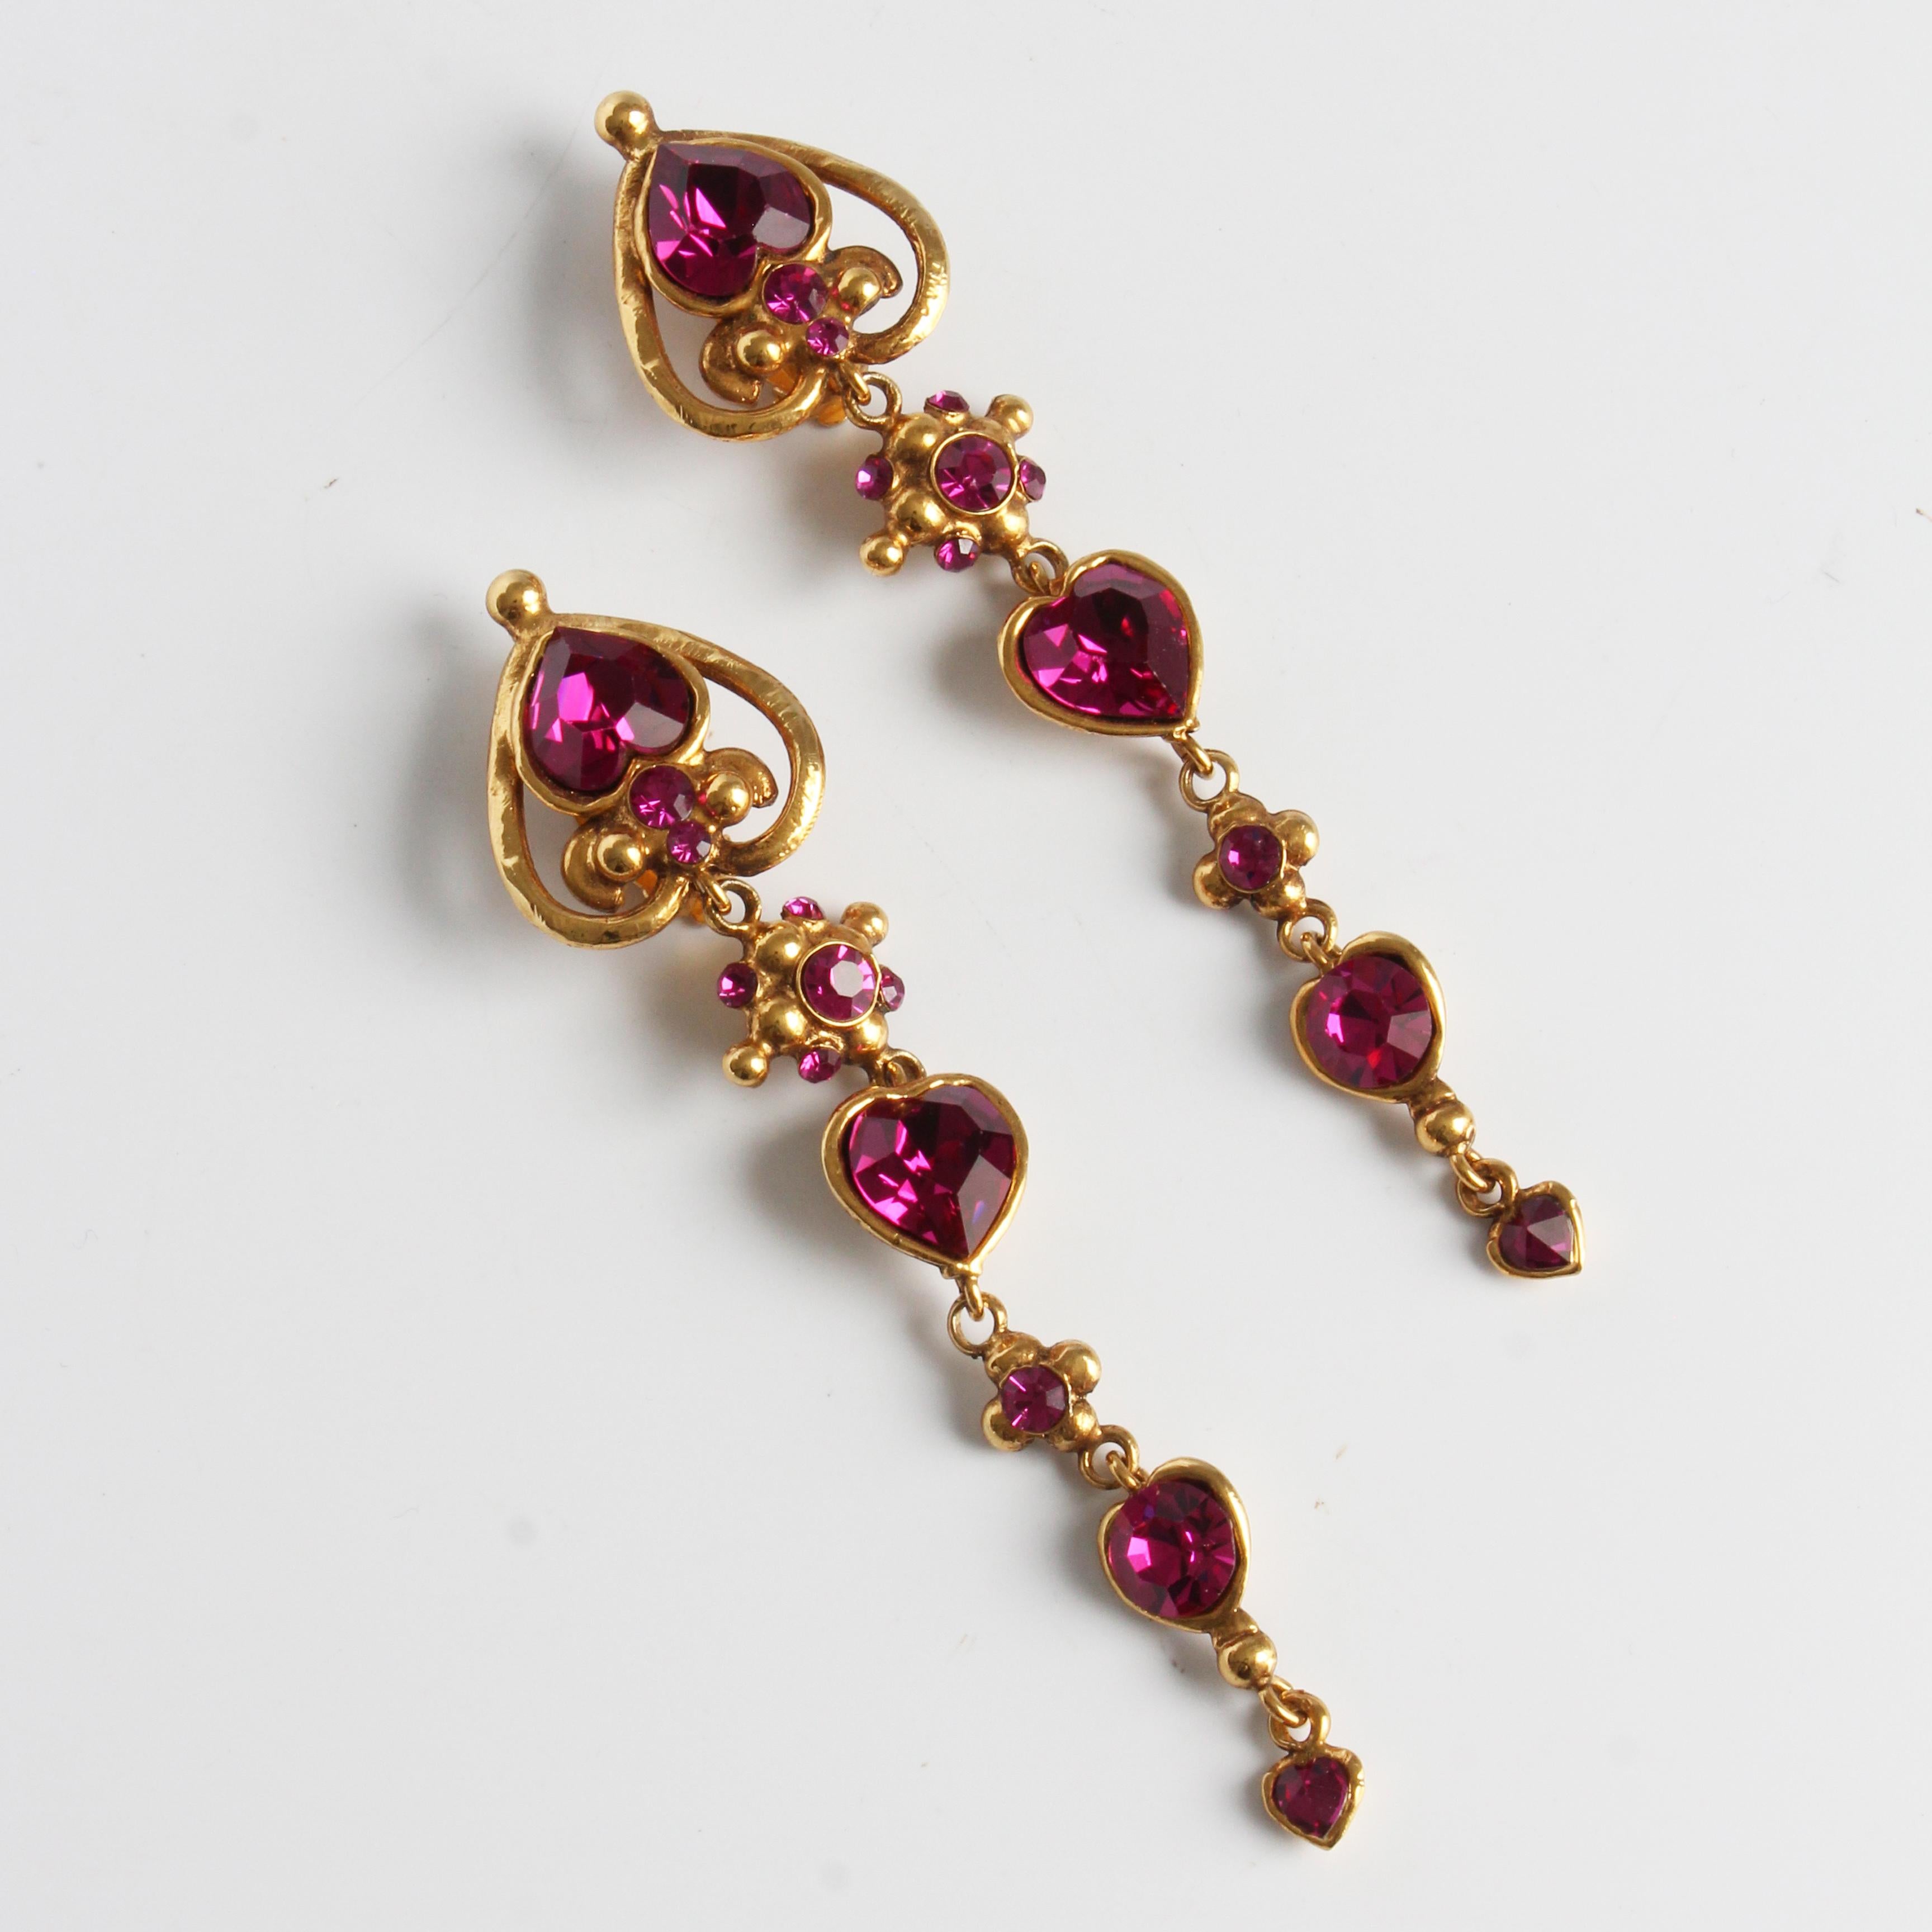 Authentic, preowned, vintage long dangle earrings, made by Emanuel Ungaro Paris, most likely in the 80s.  Made from gold metal, these baroque style earrings are set with deep pink stones which twinkle in certain light!   

A gorgeous set of